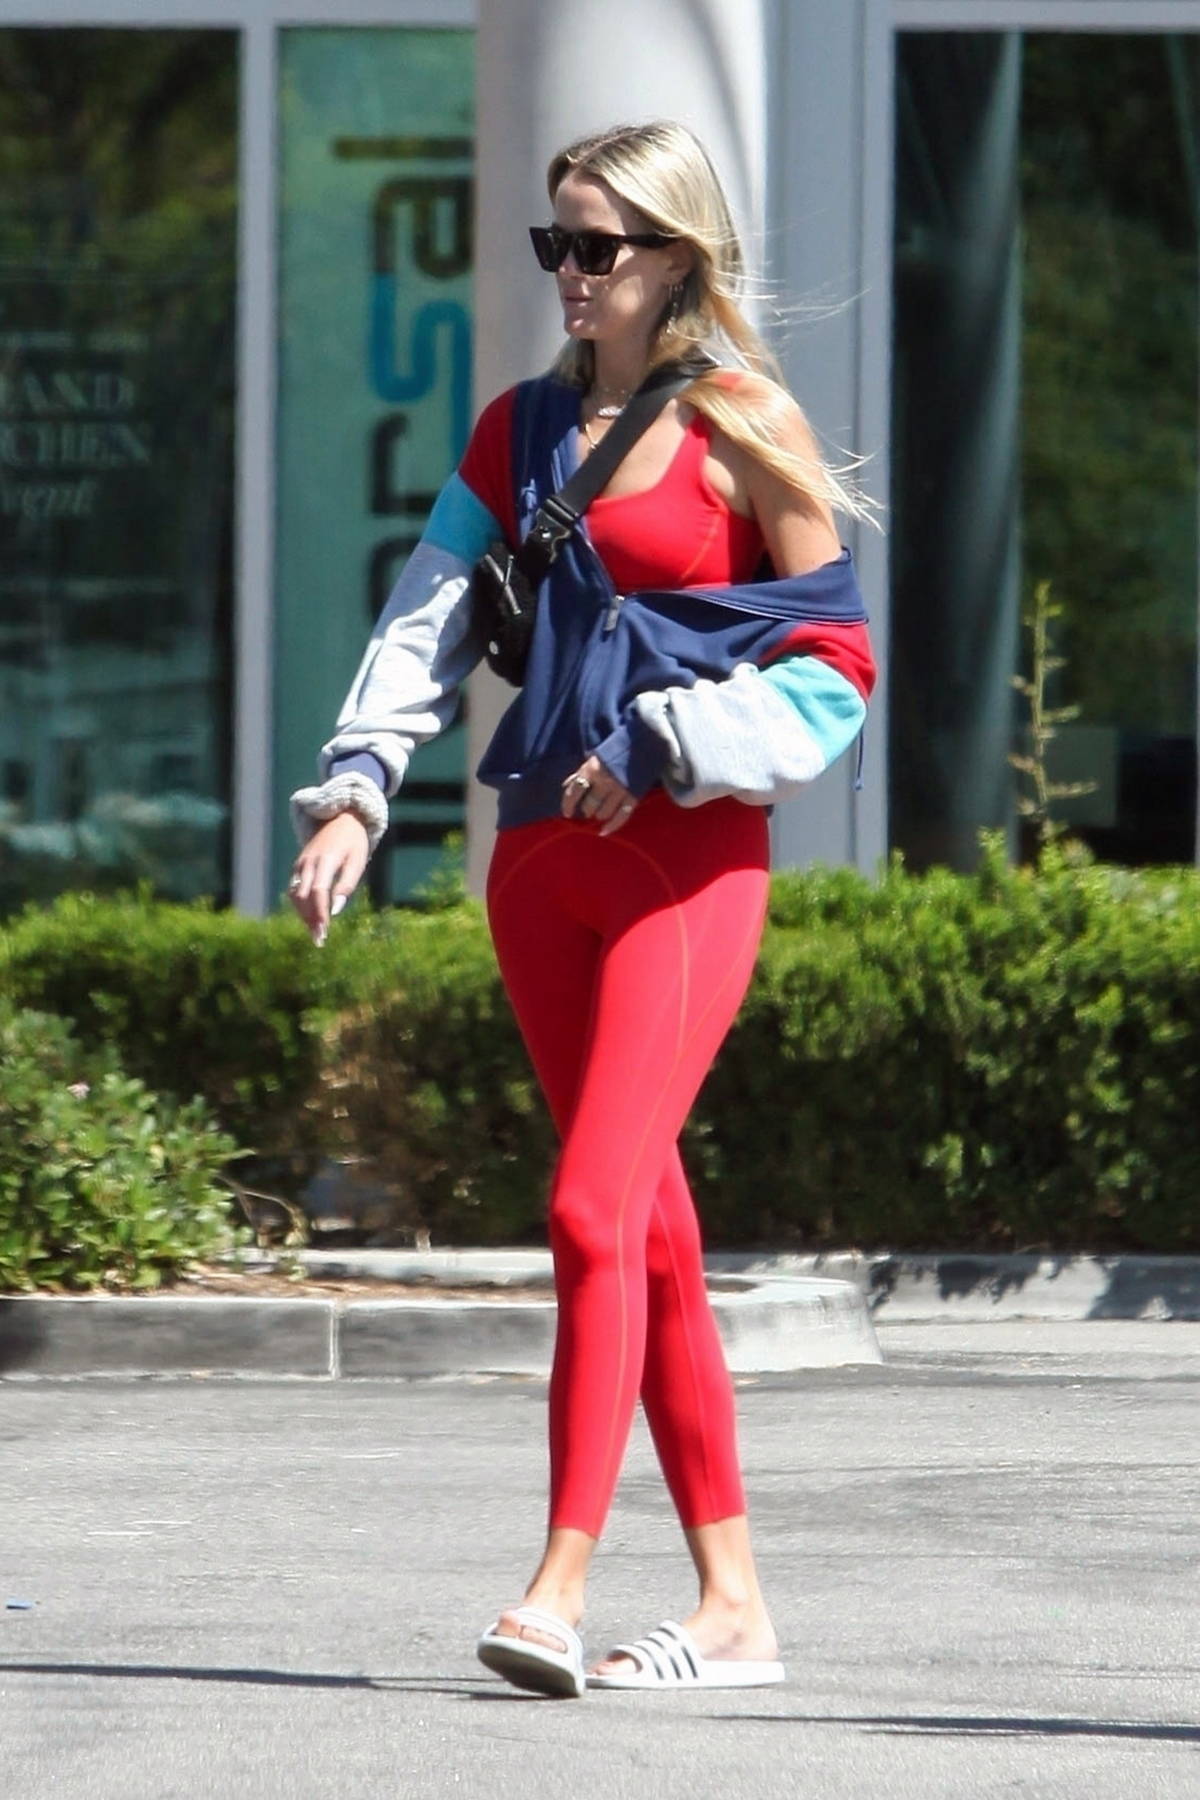 Ava Phillippe looks great in a red sports bra and leggings while out for  lunch with